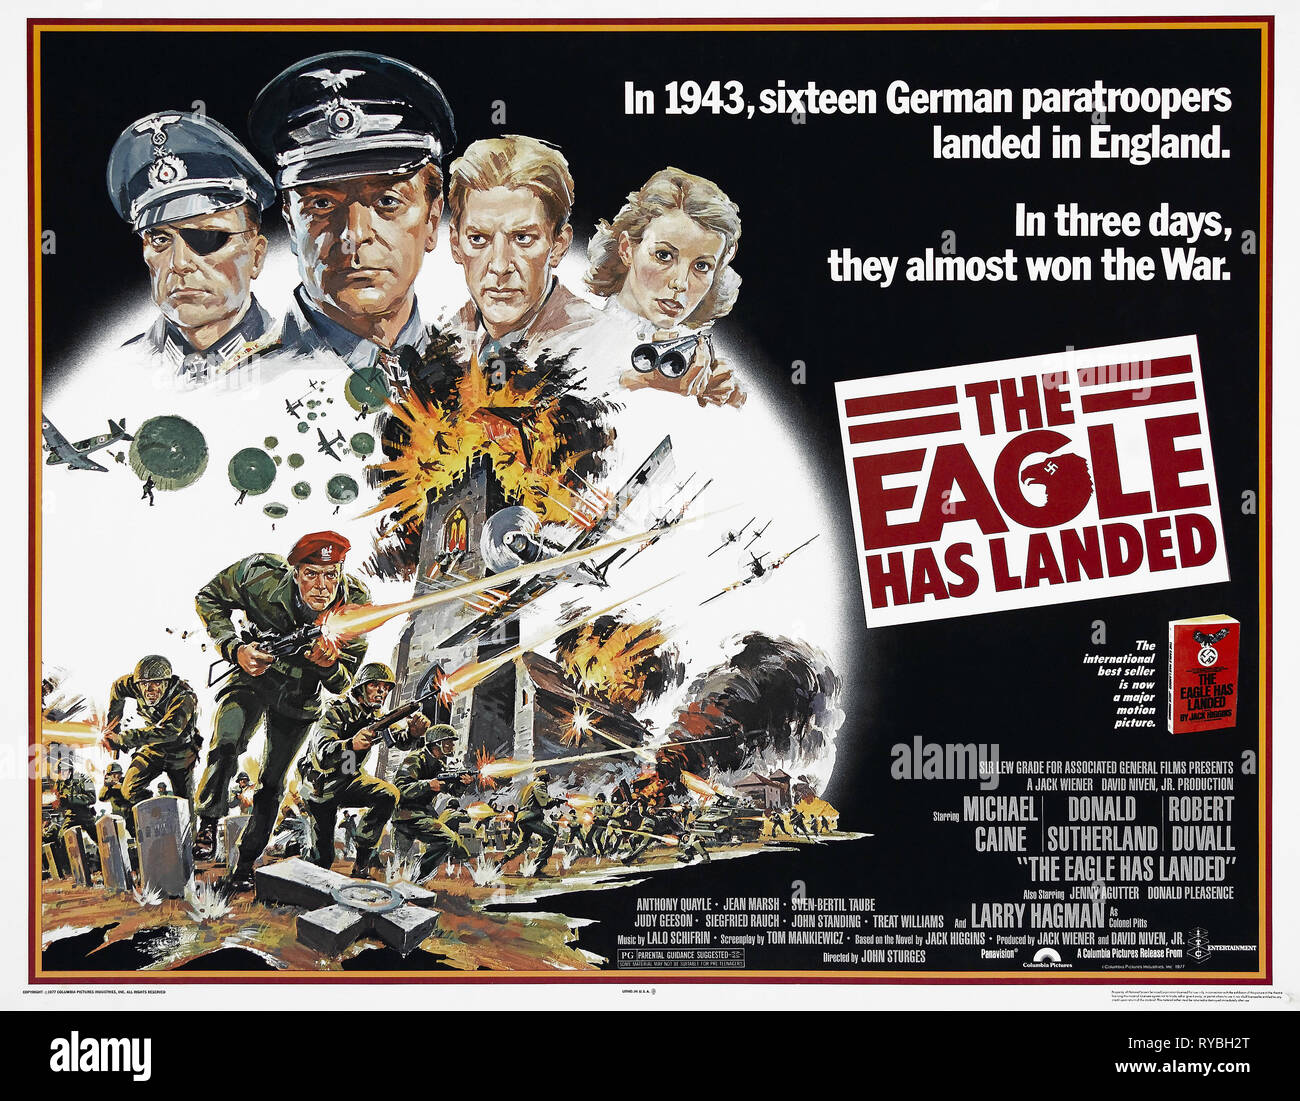 ROBERT DUVALL, MICAHEL CAINE, DONALD PLEASANCE, Jenny Agutter FILM POSTER, The Eagle Has Landed, 1976 Stockfoto